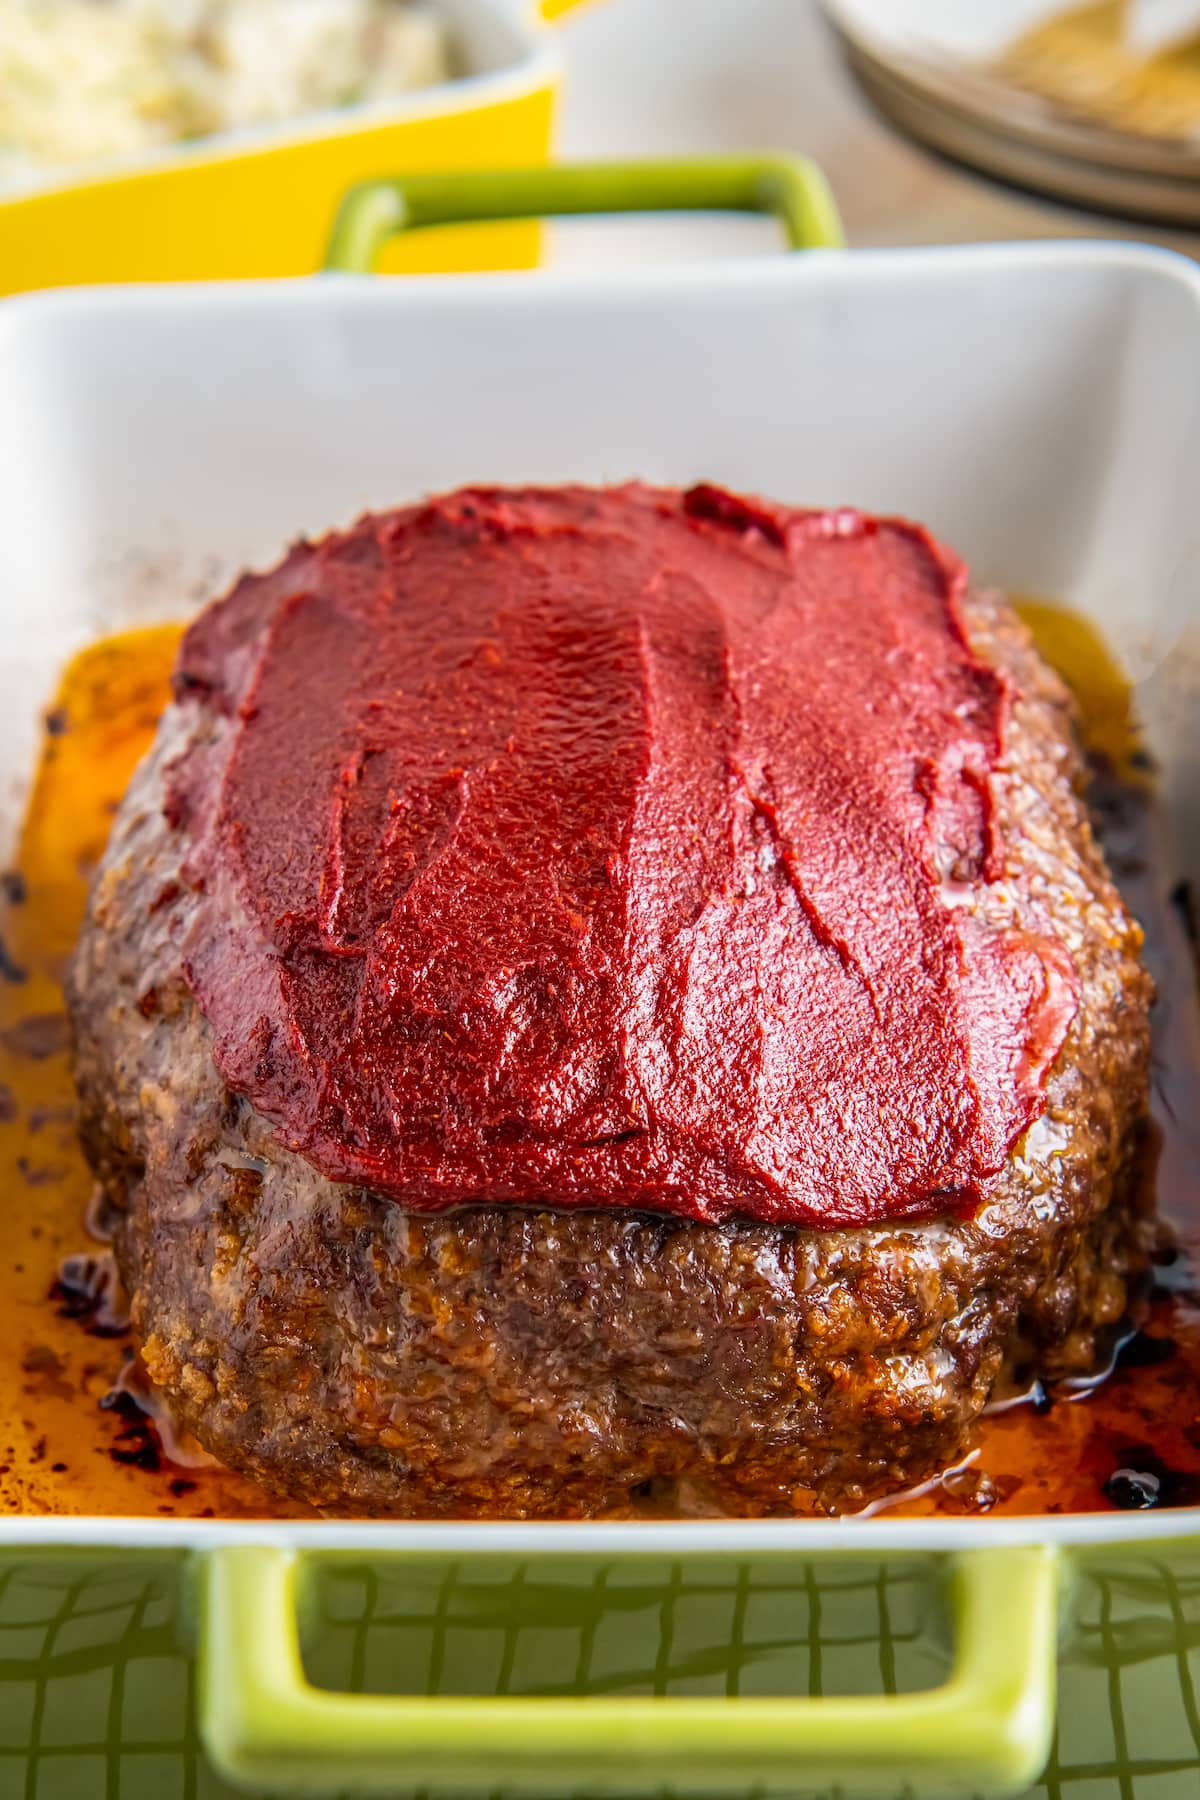 Meatloaf topped with sauce.